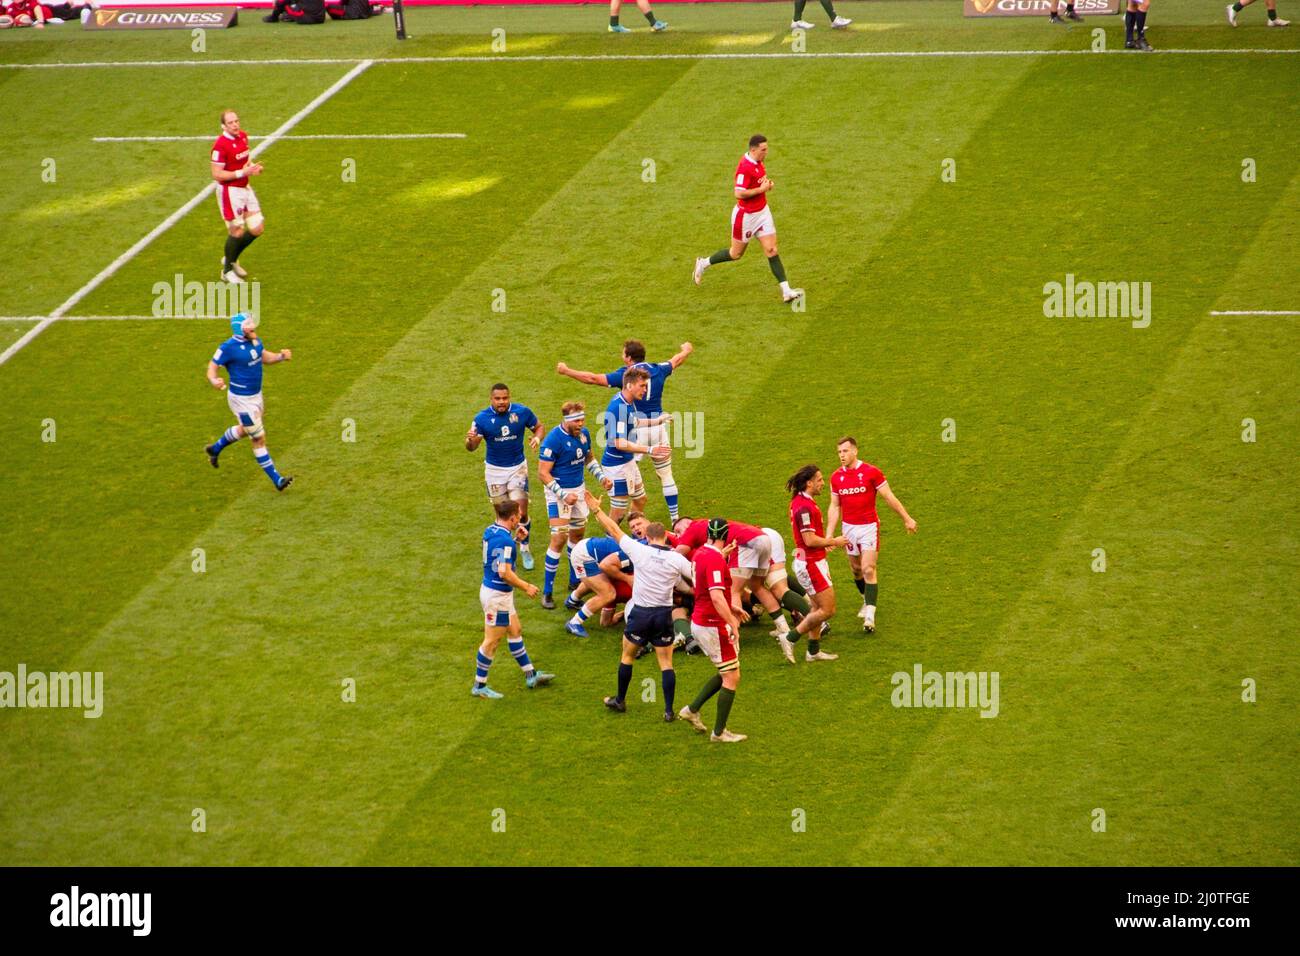 The penalty that led to the winning try/conversion Stock Photo